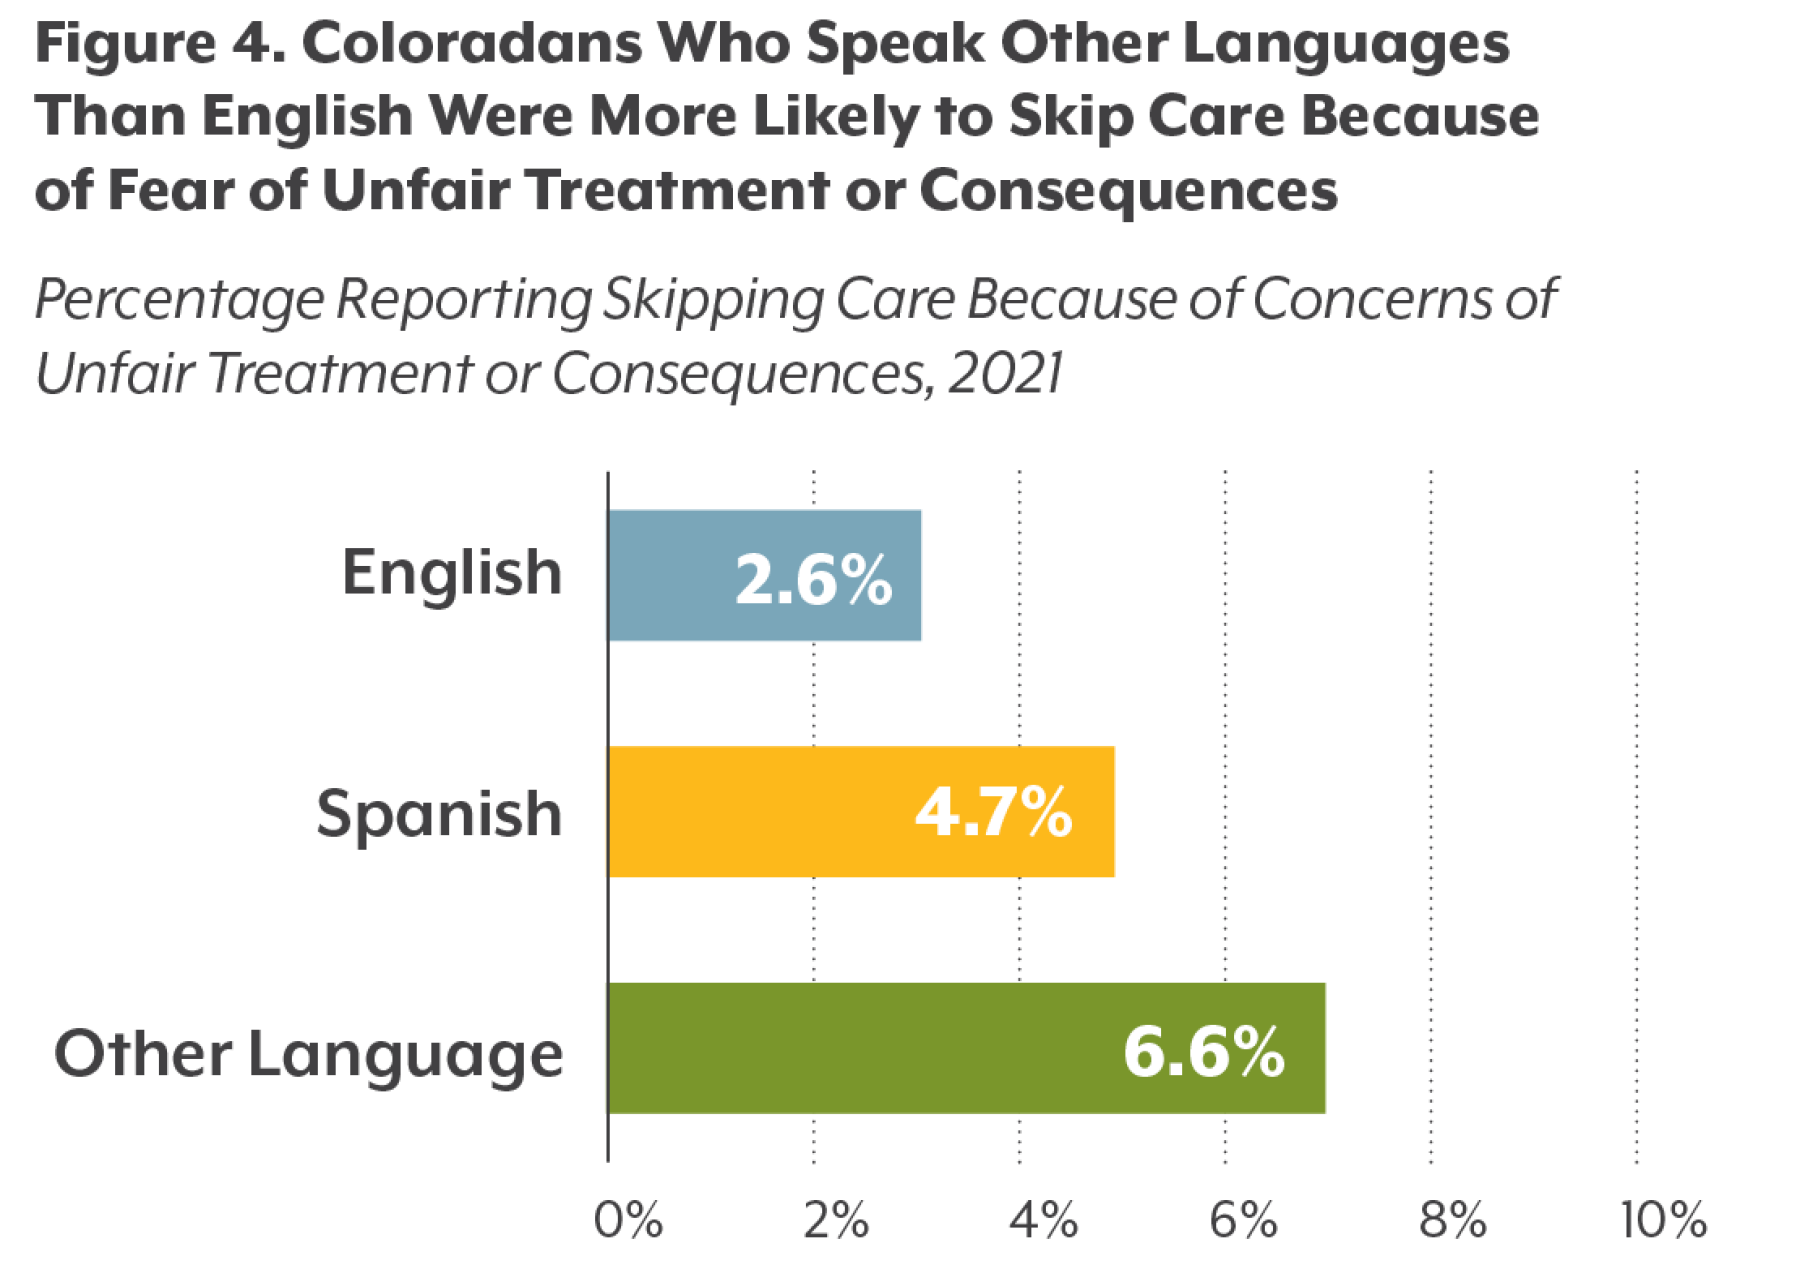 Coloradans Who Speak Other Languages Than English Were Most Likely to Skip Care Due to Fear of Unfair Treatment or Consequences